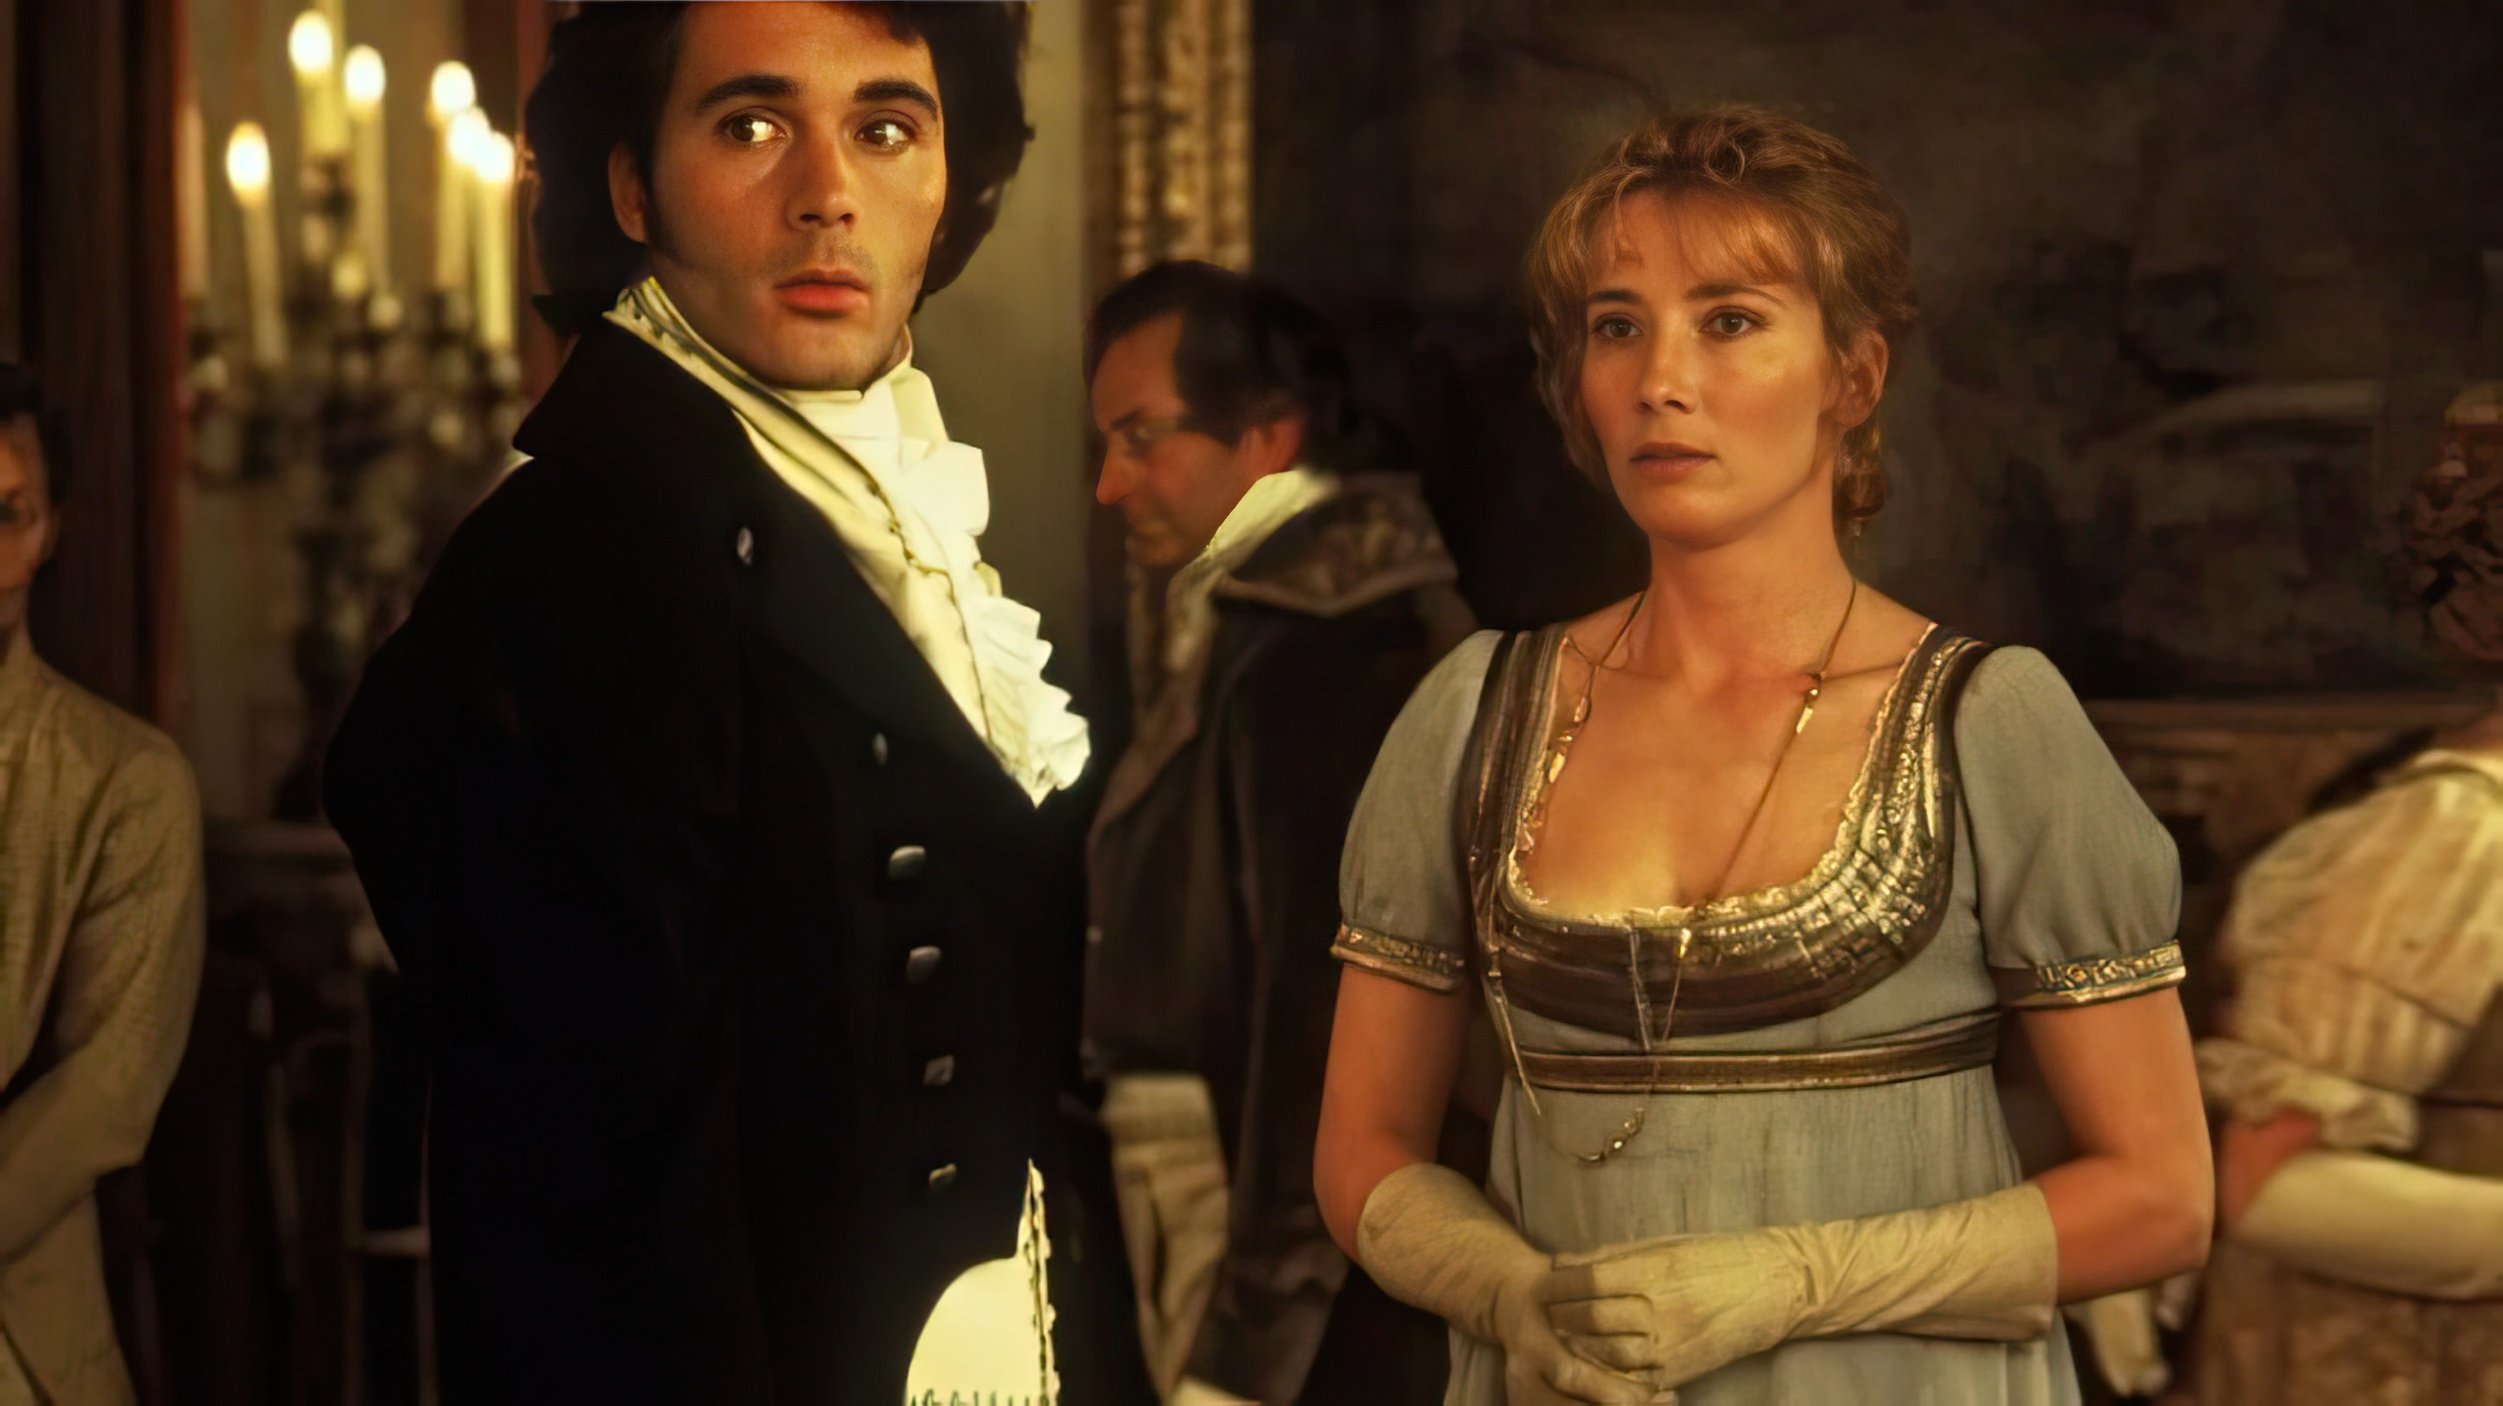 A scene from the movie ‘Sense and Sensibility’